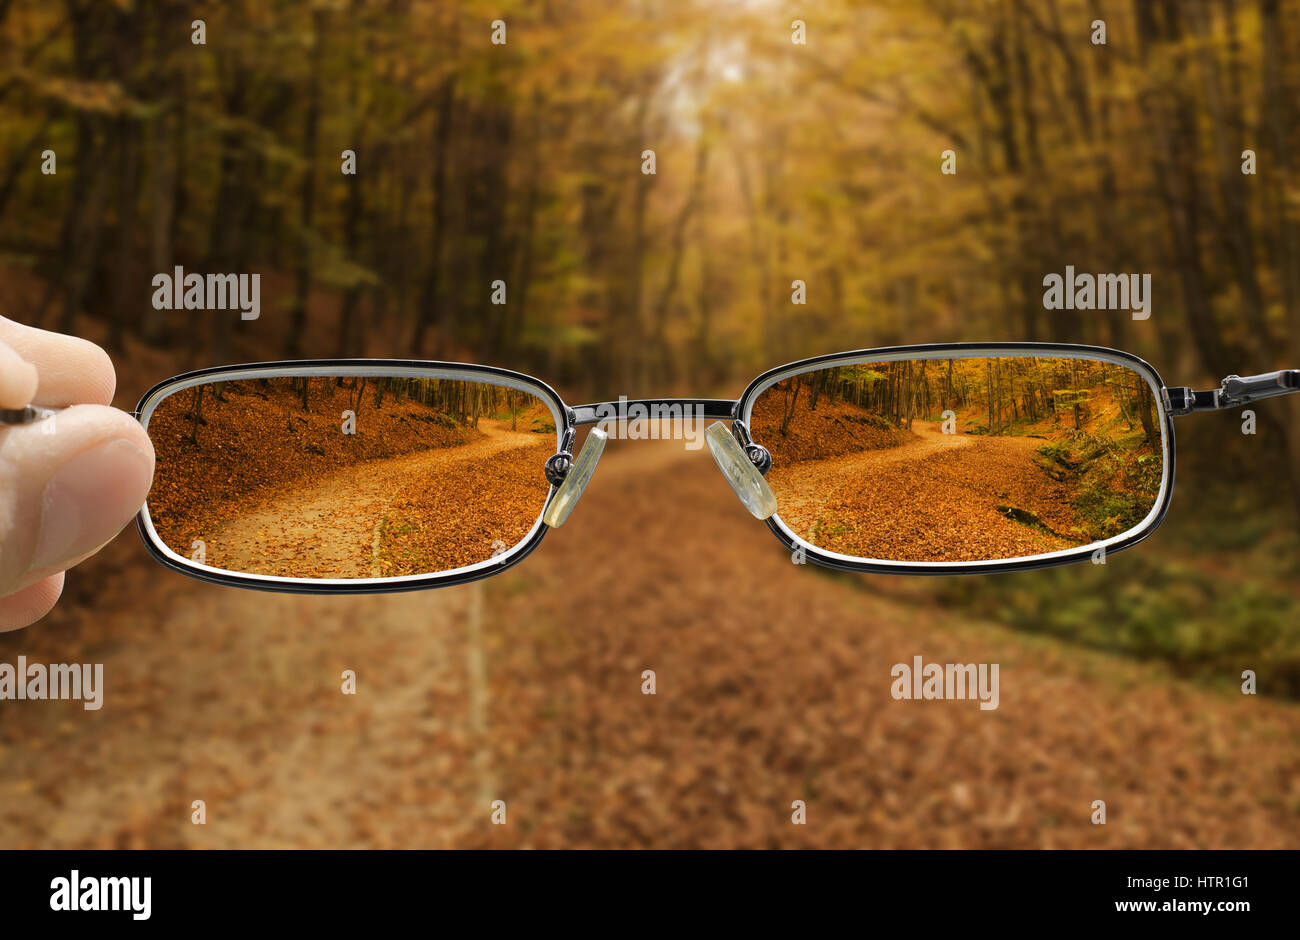 seeing forest path in autumn through glasses that improve vision Stock Photo